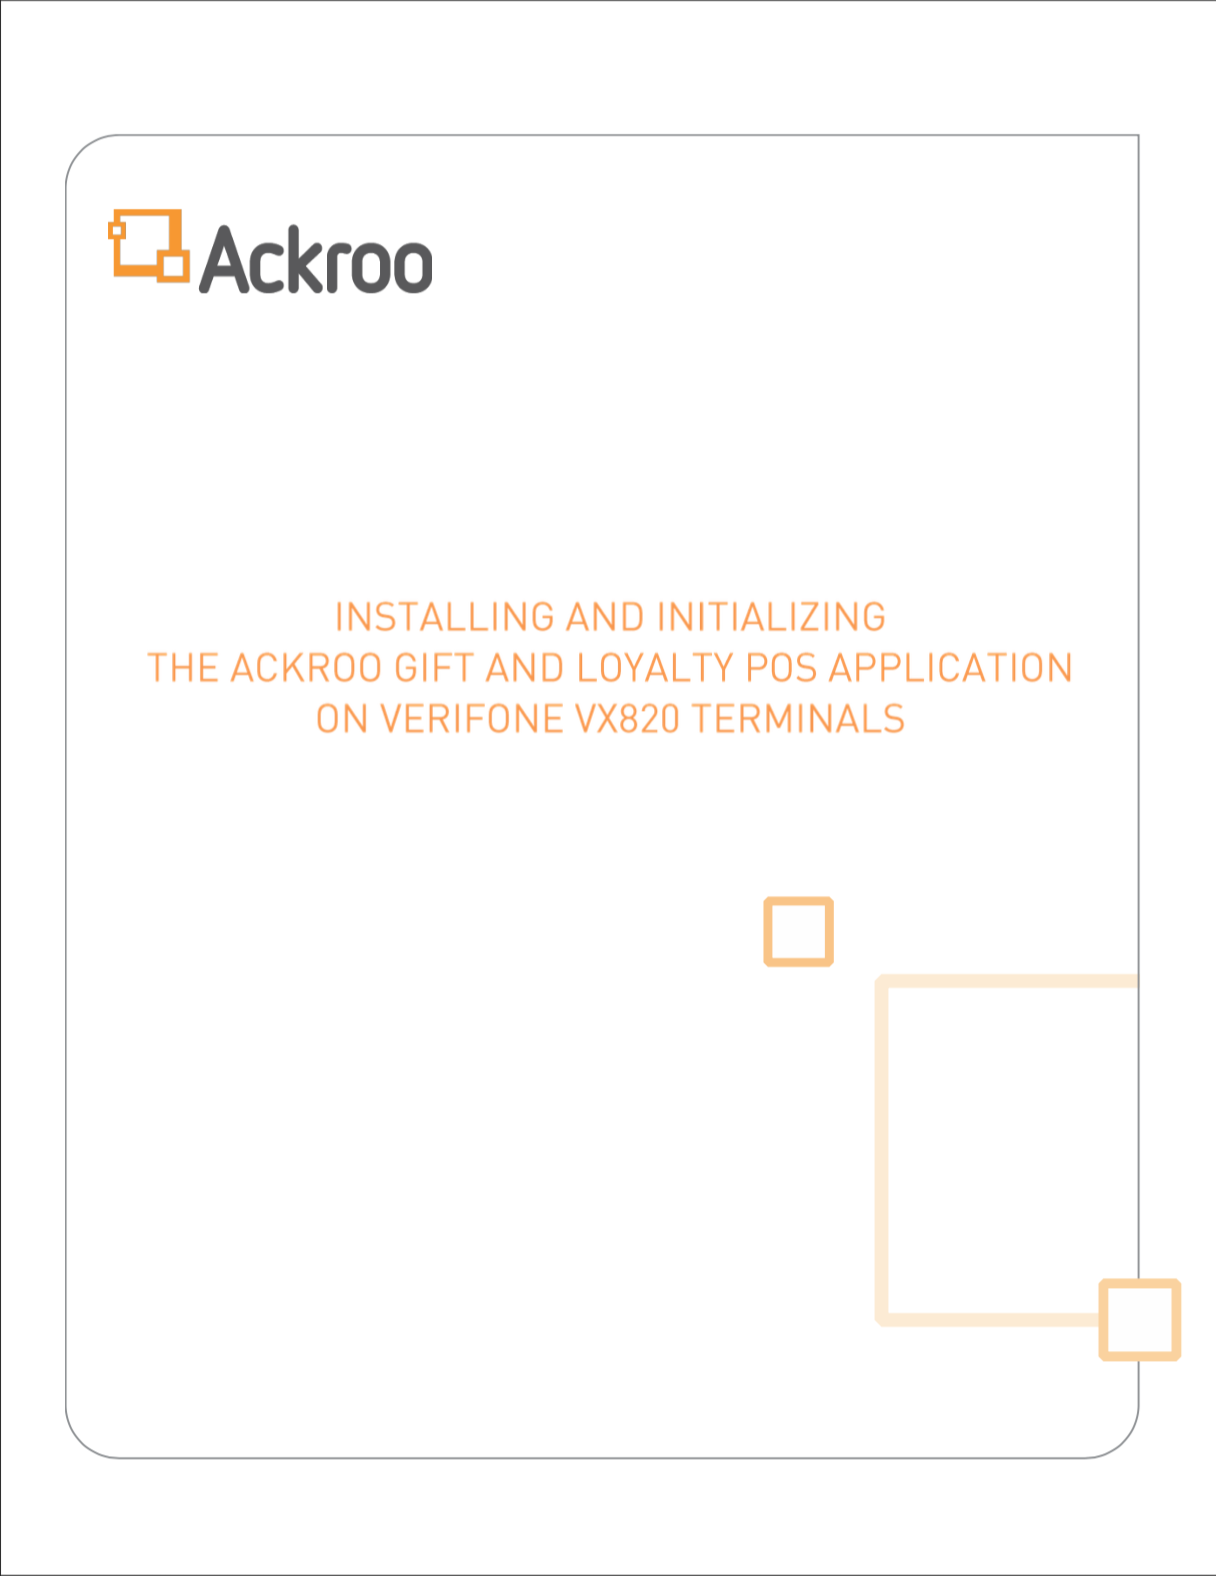 Verifone_Evolution_Vx820_Ackapp_installation_guide_-_Page_1.png